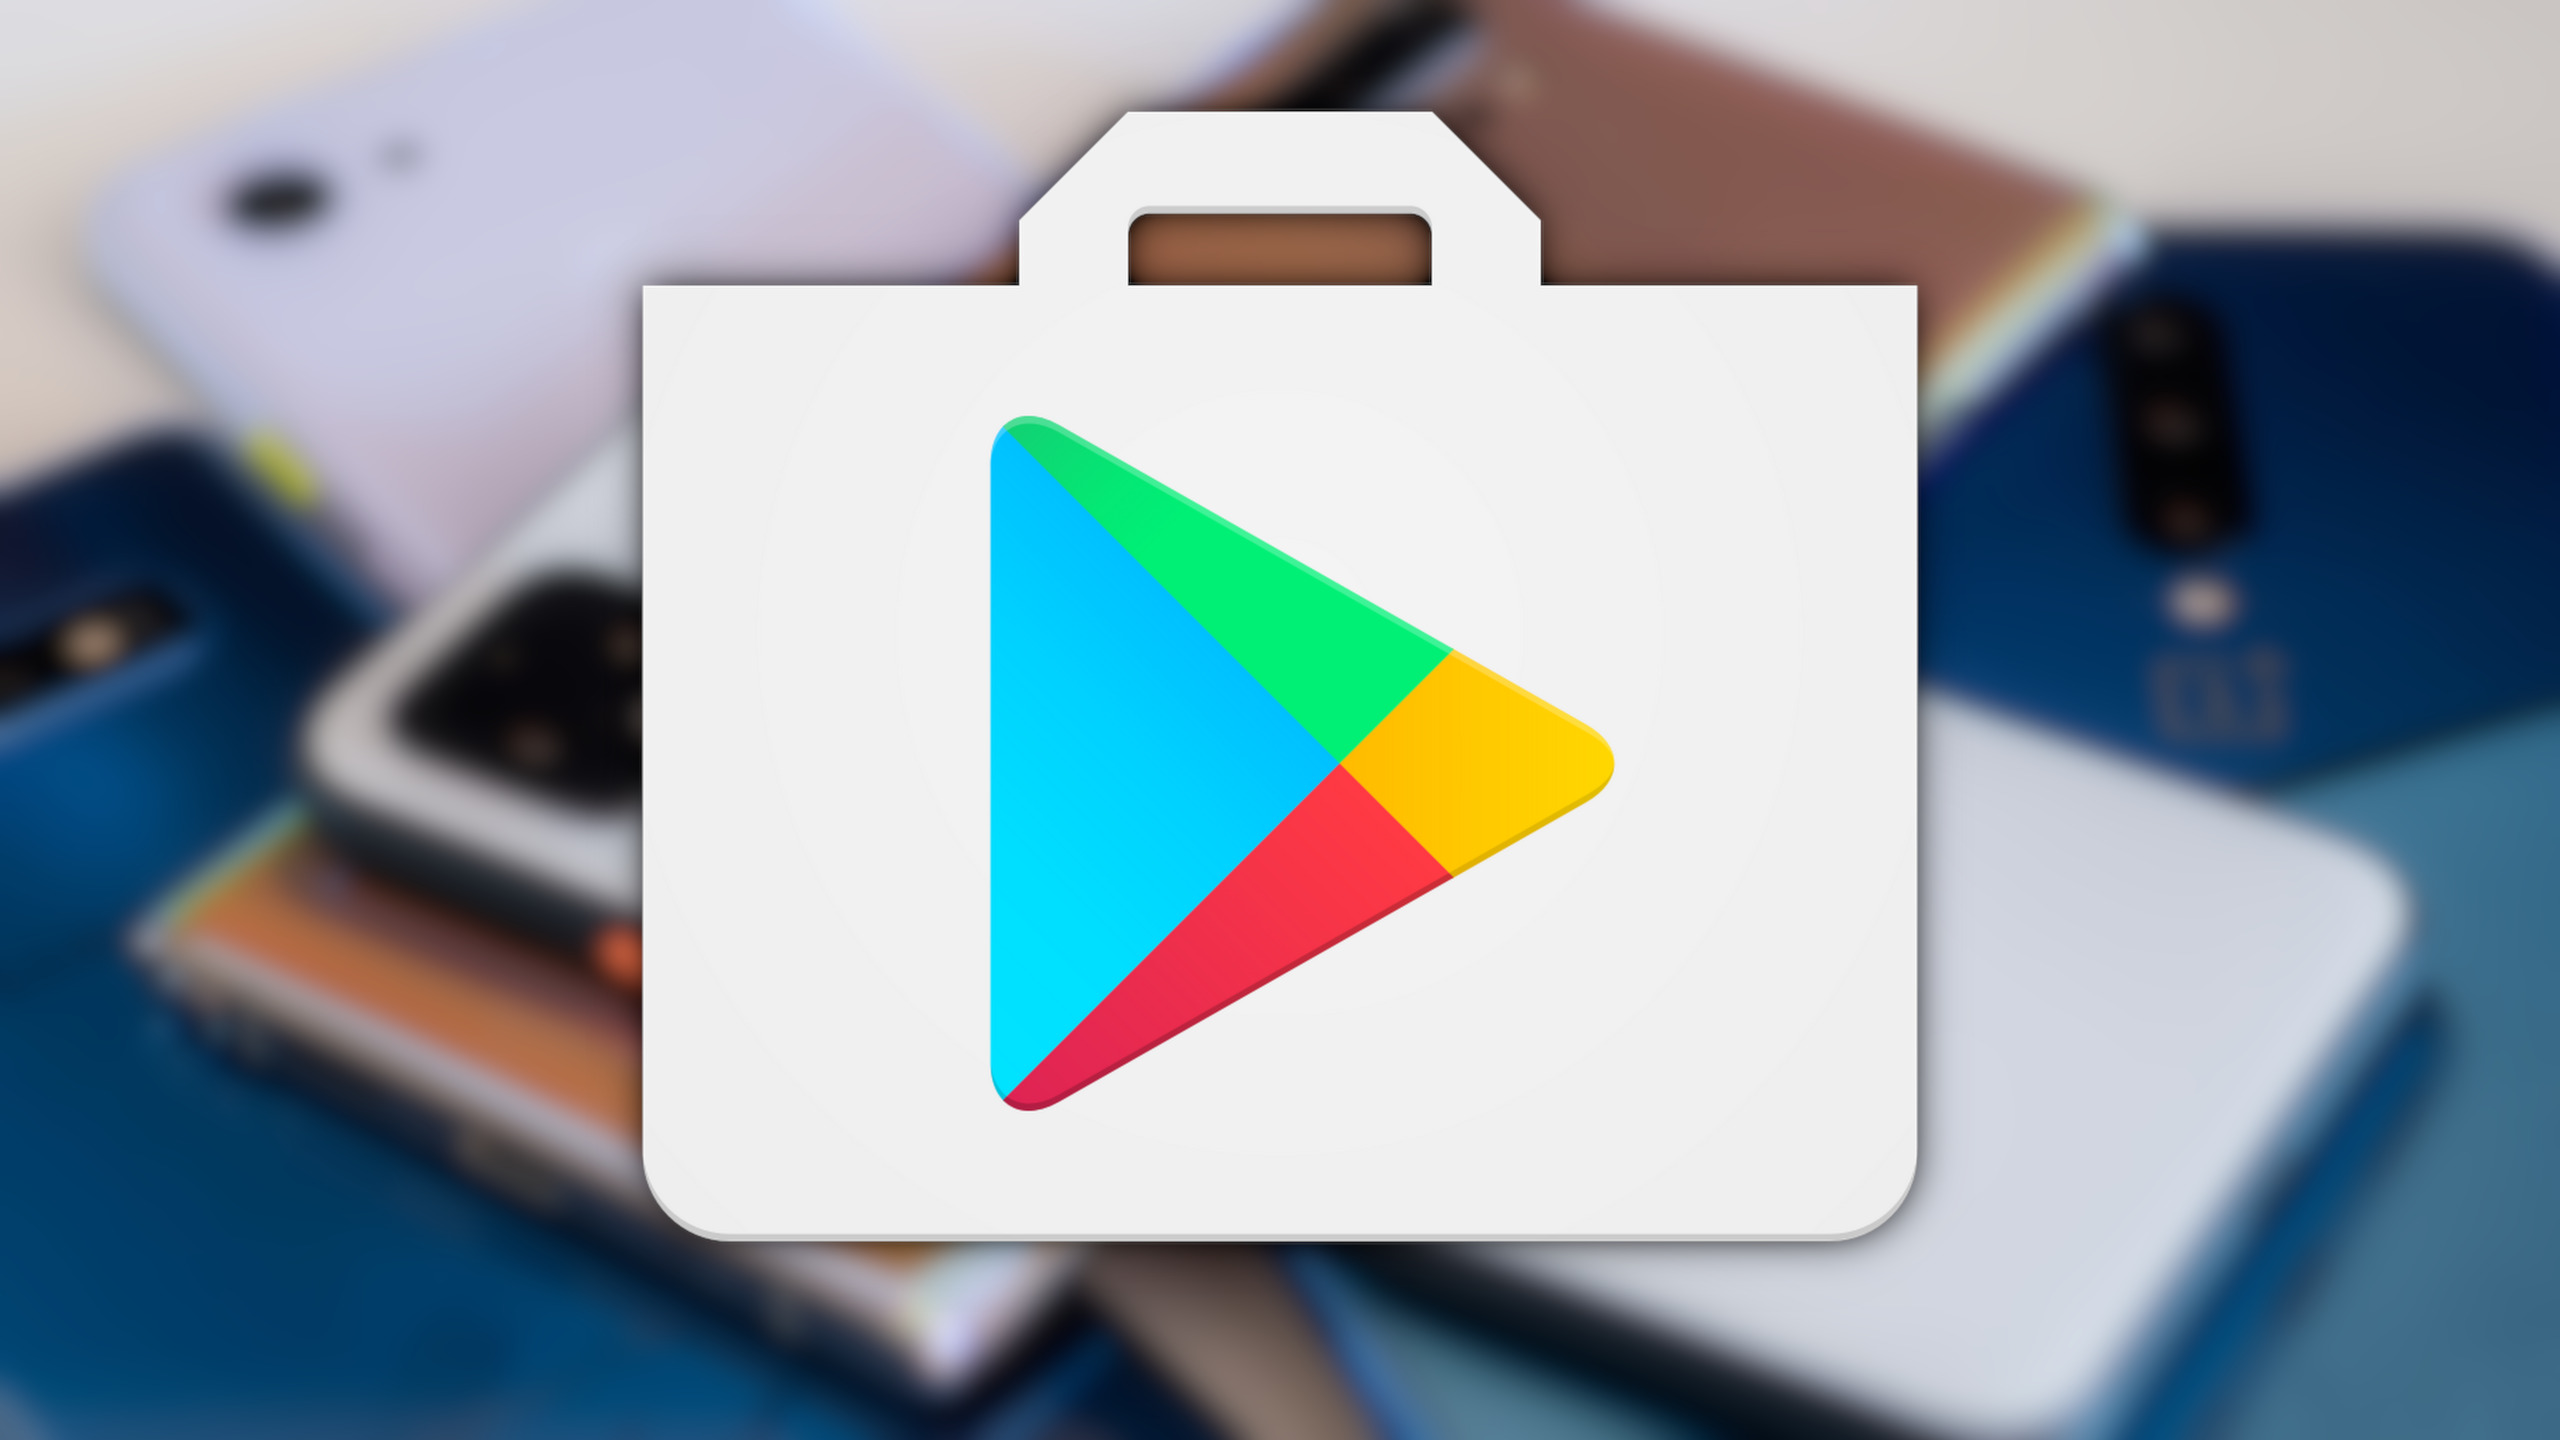 download google play store for china phone